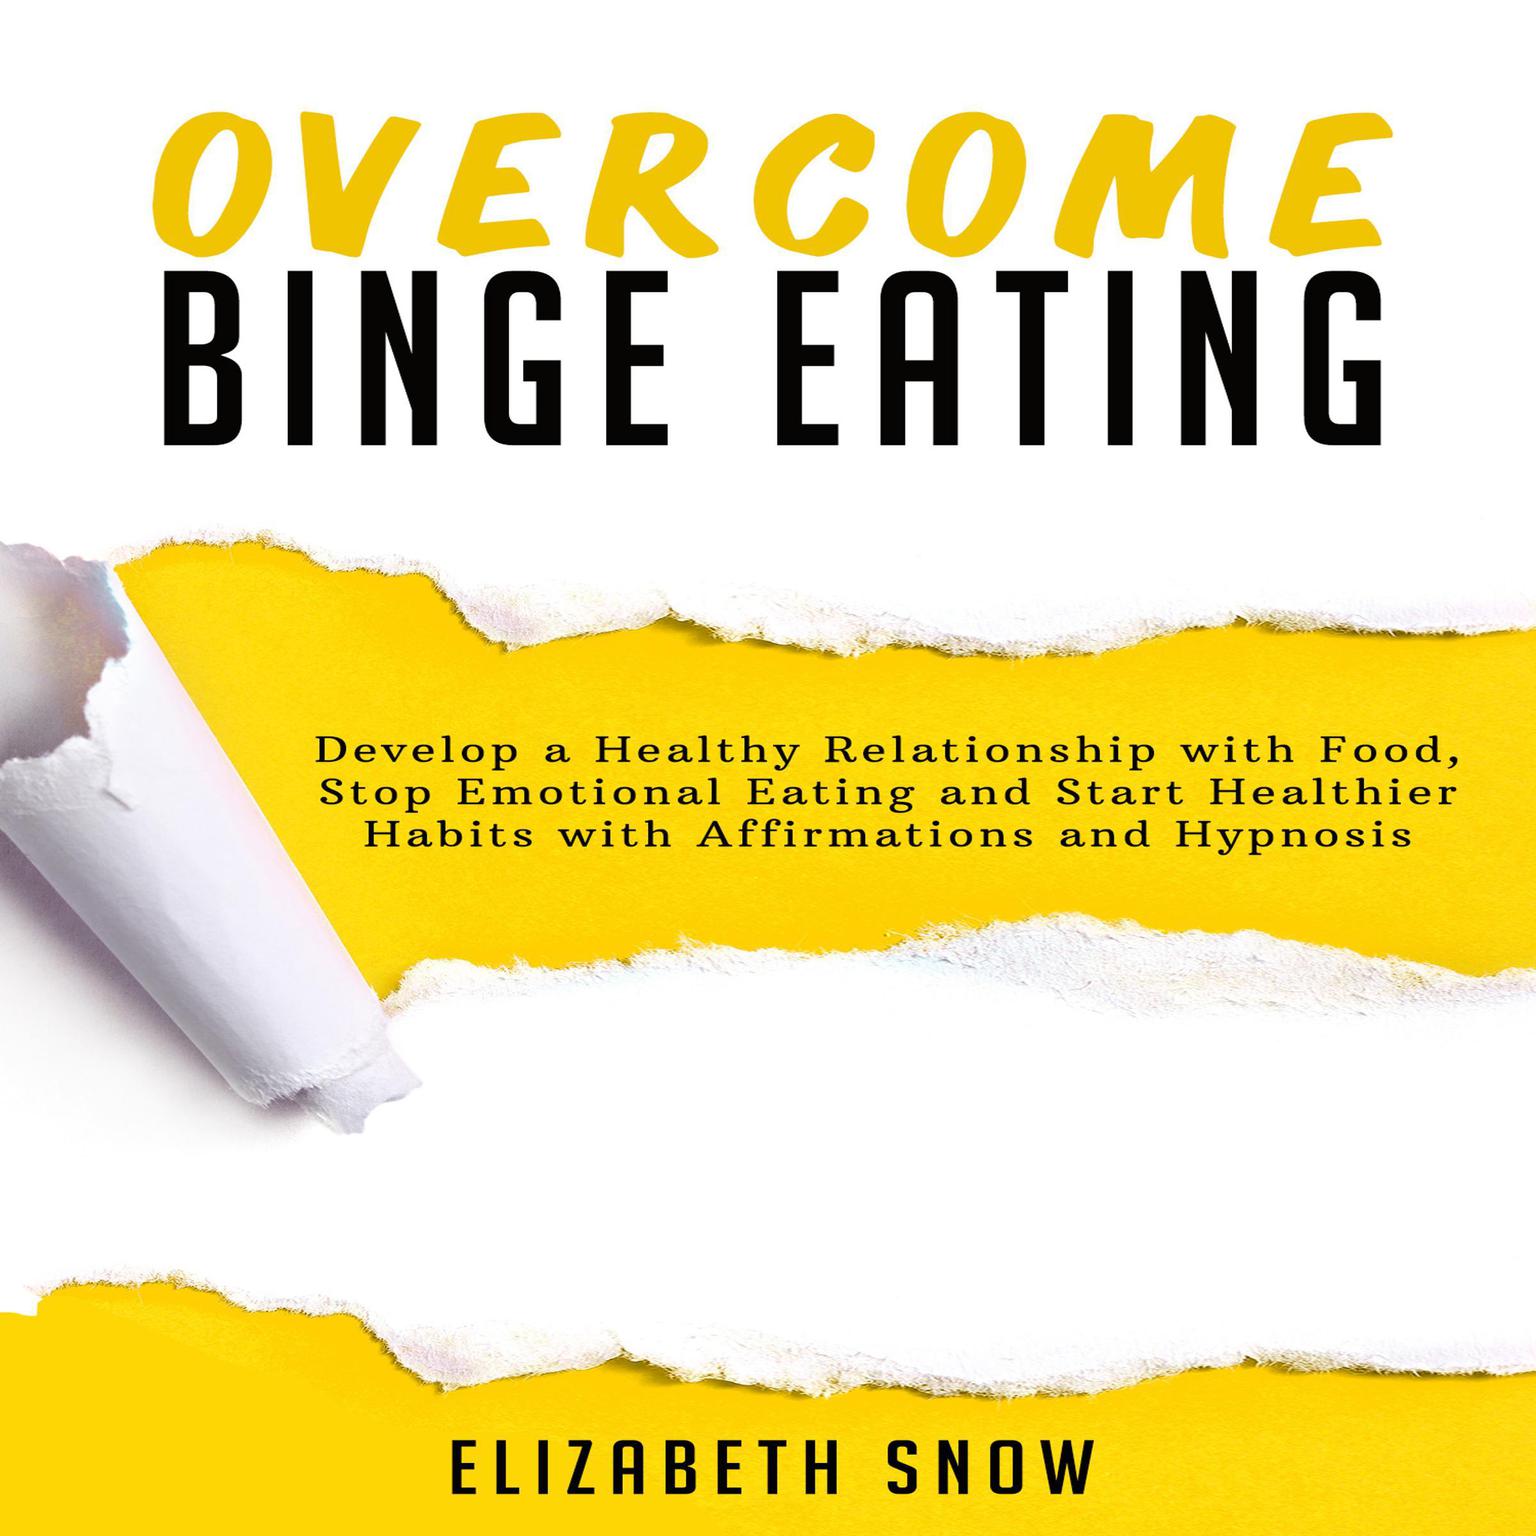 Overcome Binge Eating: Develop a Healthy Relationship with Food, Stop Emotional Eating and Start Healthier Habits with Affirmations and Hypnosis Audiobook, by Elizabeth Snow